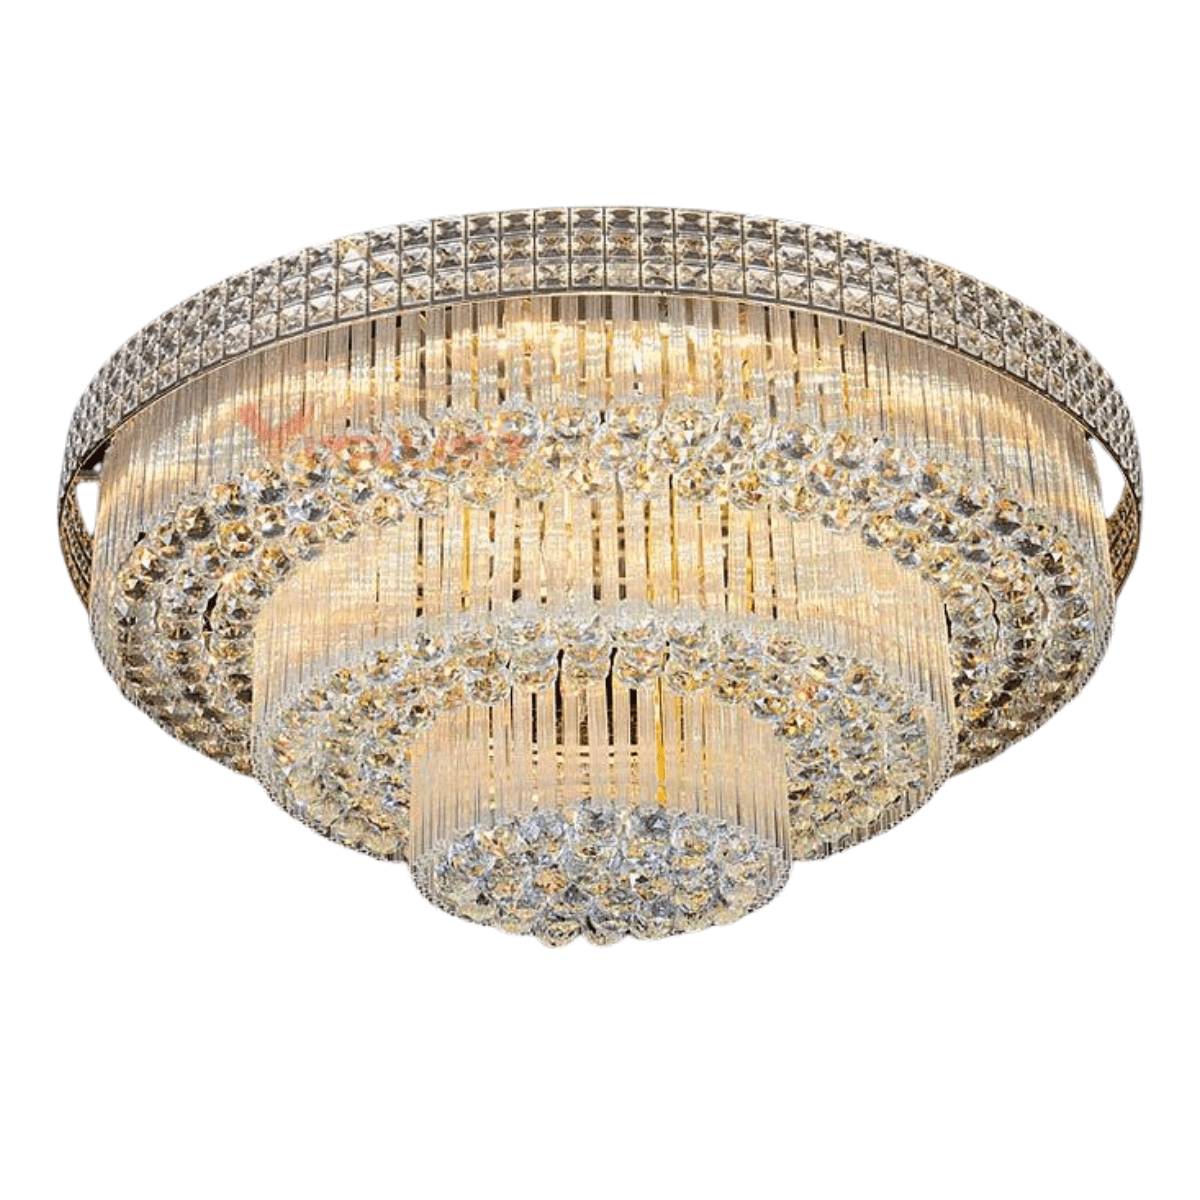 Buy Modern LED Round Luxury Crystal Ceiling Chandelier - 8879-Series | Shop at Supply Master Accra, Ghana Lamps & Lightings Buy Tools hardware Building materials